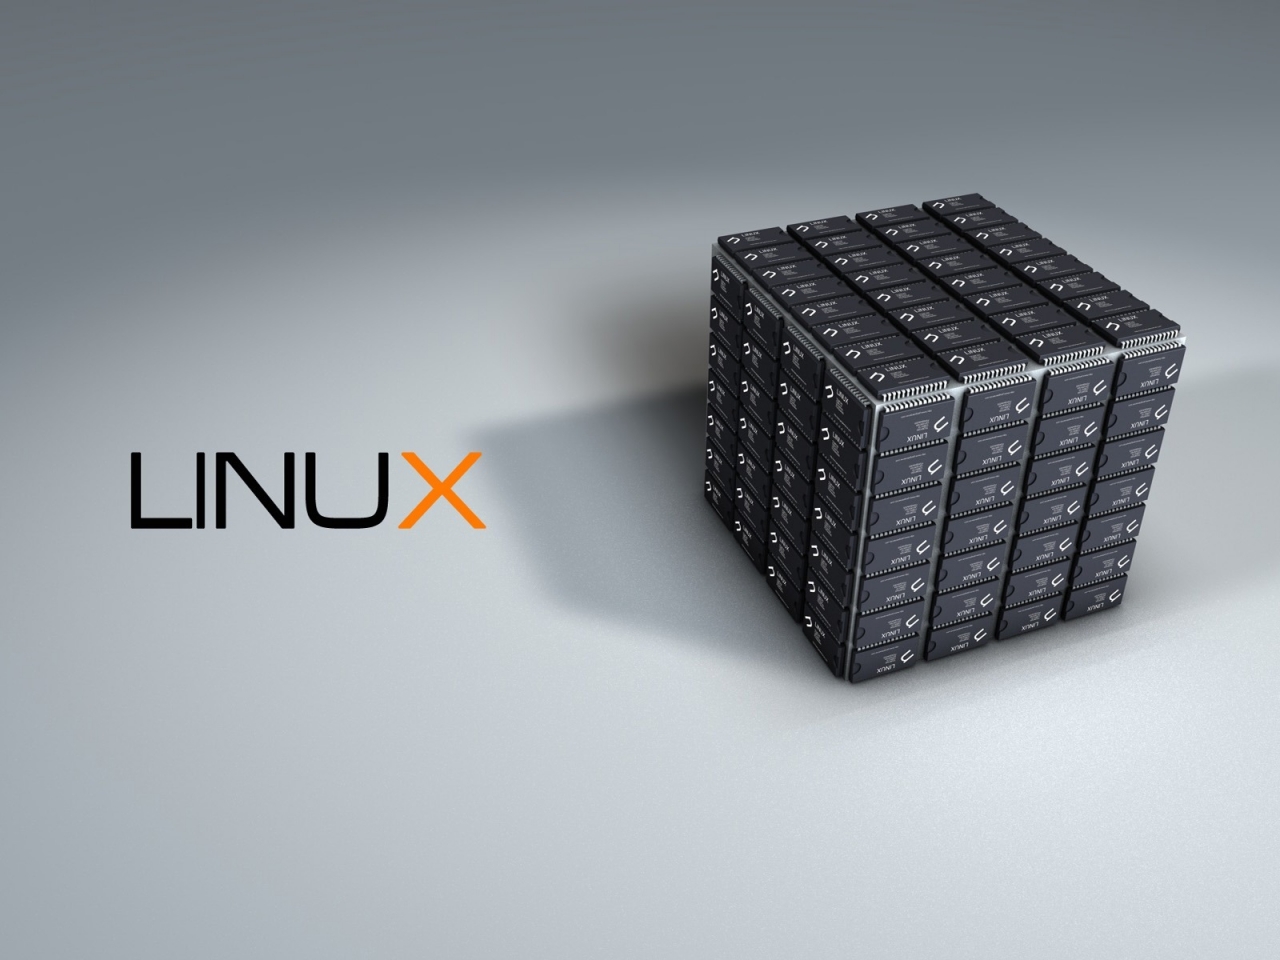 Linux Cube for 1280 x 960 resolution